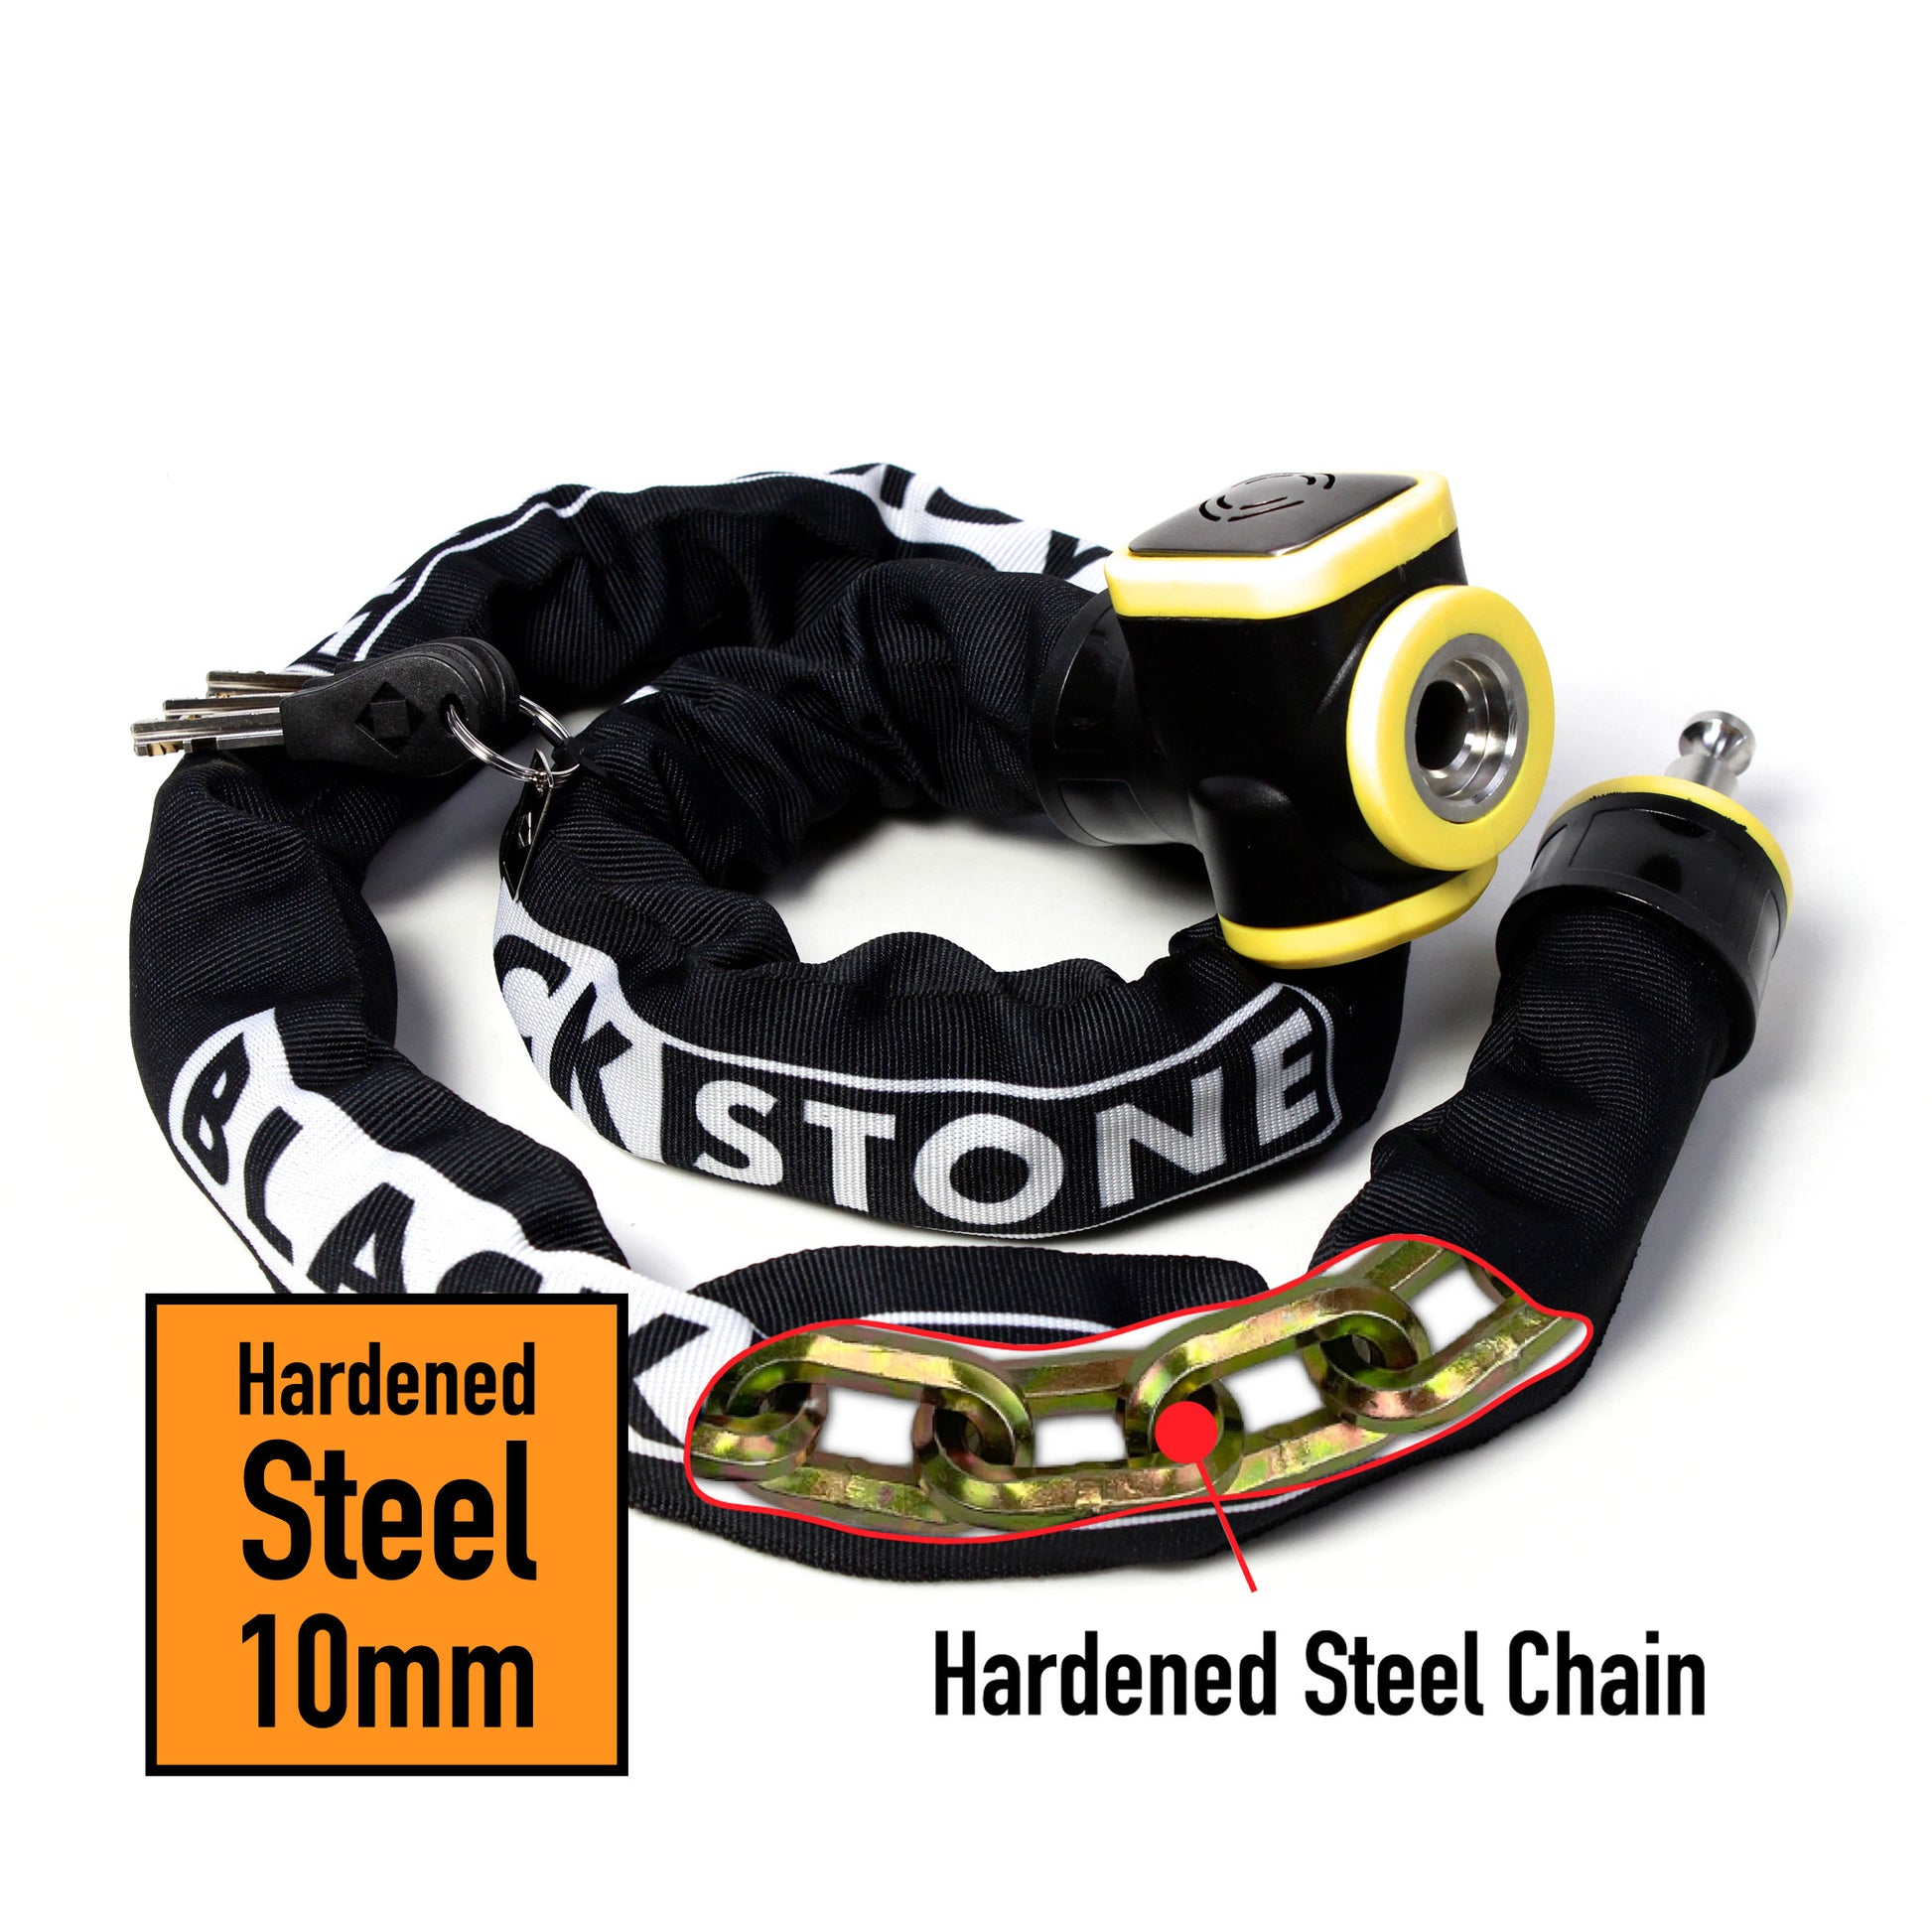 The image features a Blackstone branded alarm chain lock. It highlights the key aspects of the product such as the hardened steel chain, which is 10mm in thickness, ensuring strong resistance against cutting or breaking attempts. The chain is encased in a fabric sleeve with the Blackstone logo printed on it, which helps protect surfaces from scratches. The locking mechanism has a prominent alarm system, designed to deter theft by sounding a loud noise. 